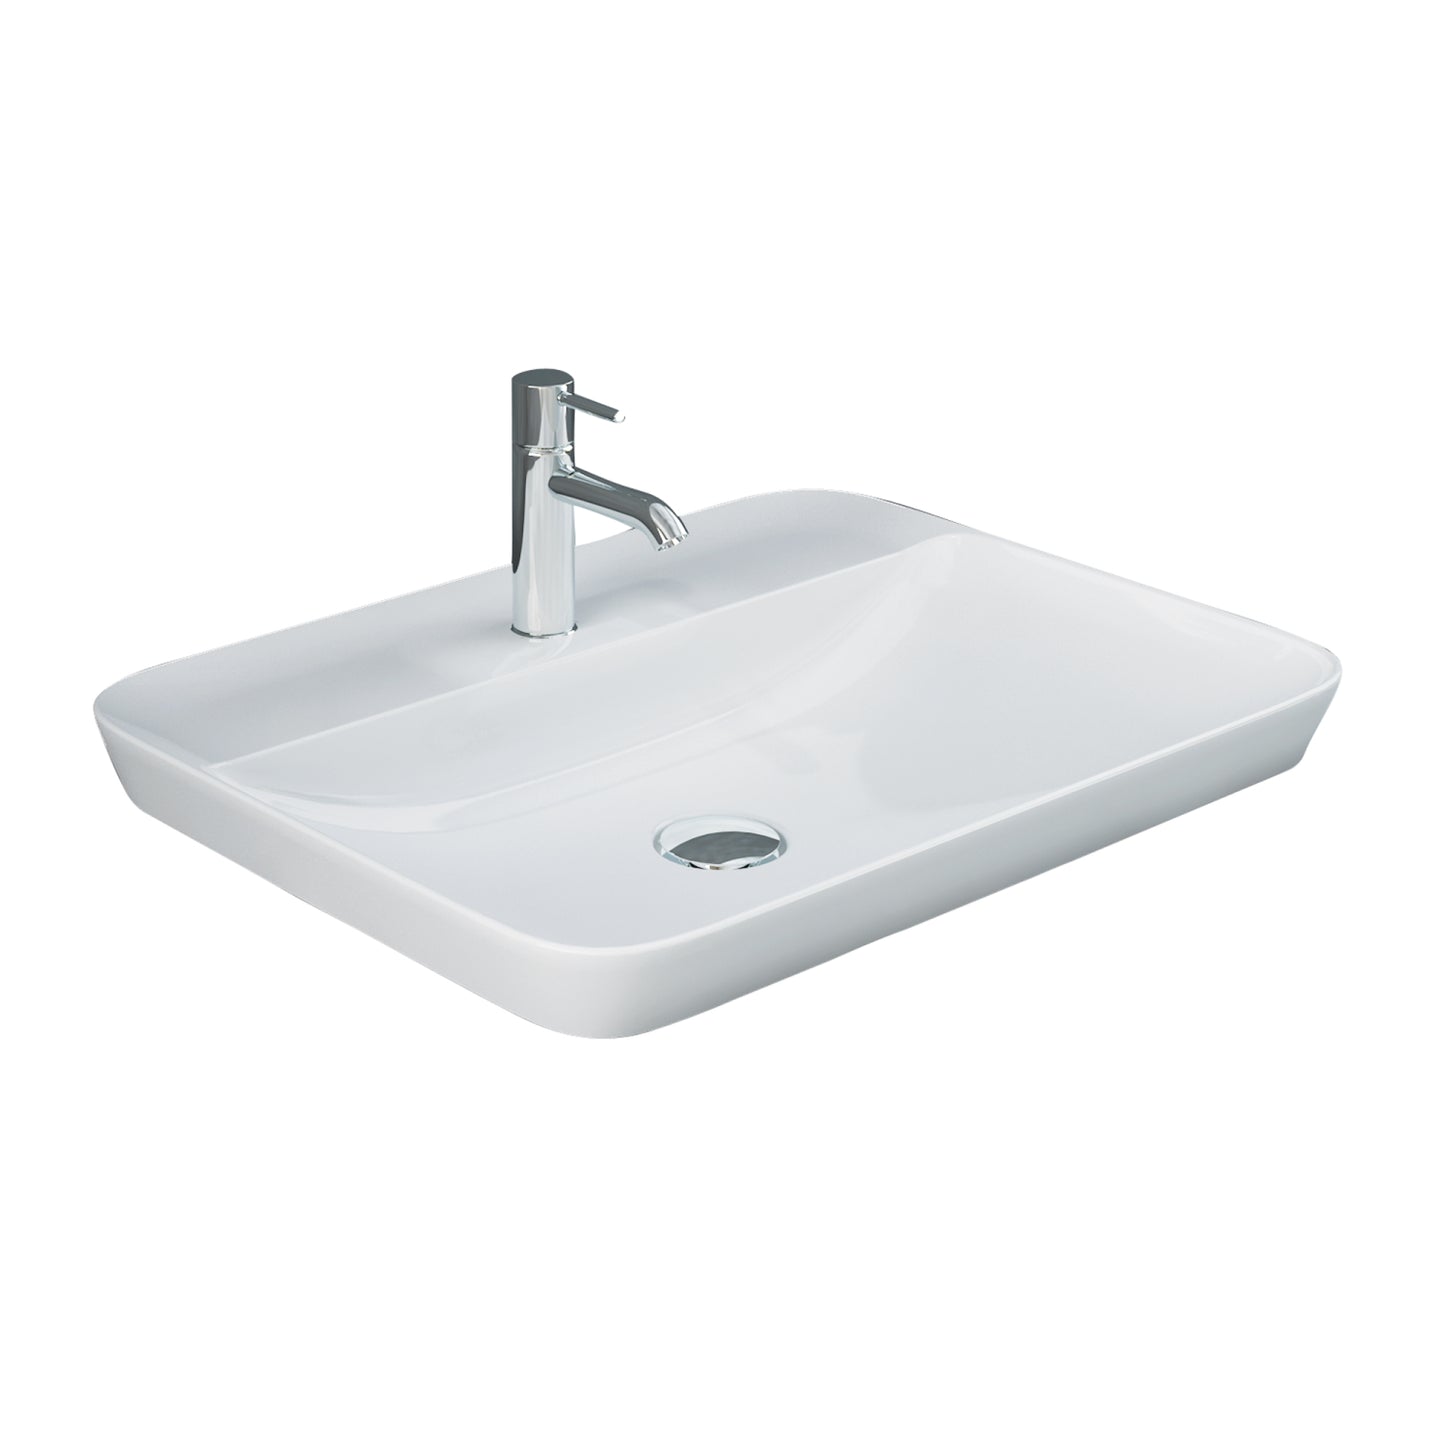 Variant 21 5/8" x 16 1/2" Rectangular Drop In Sink with 1 Faucet Hole in White